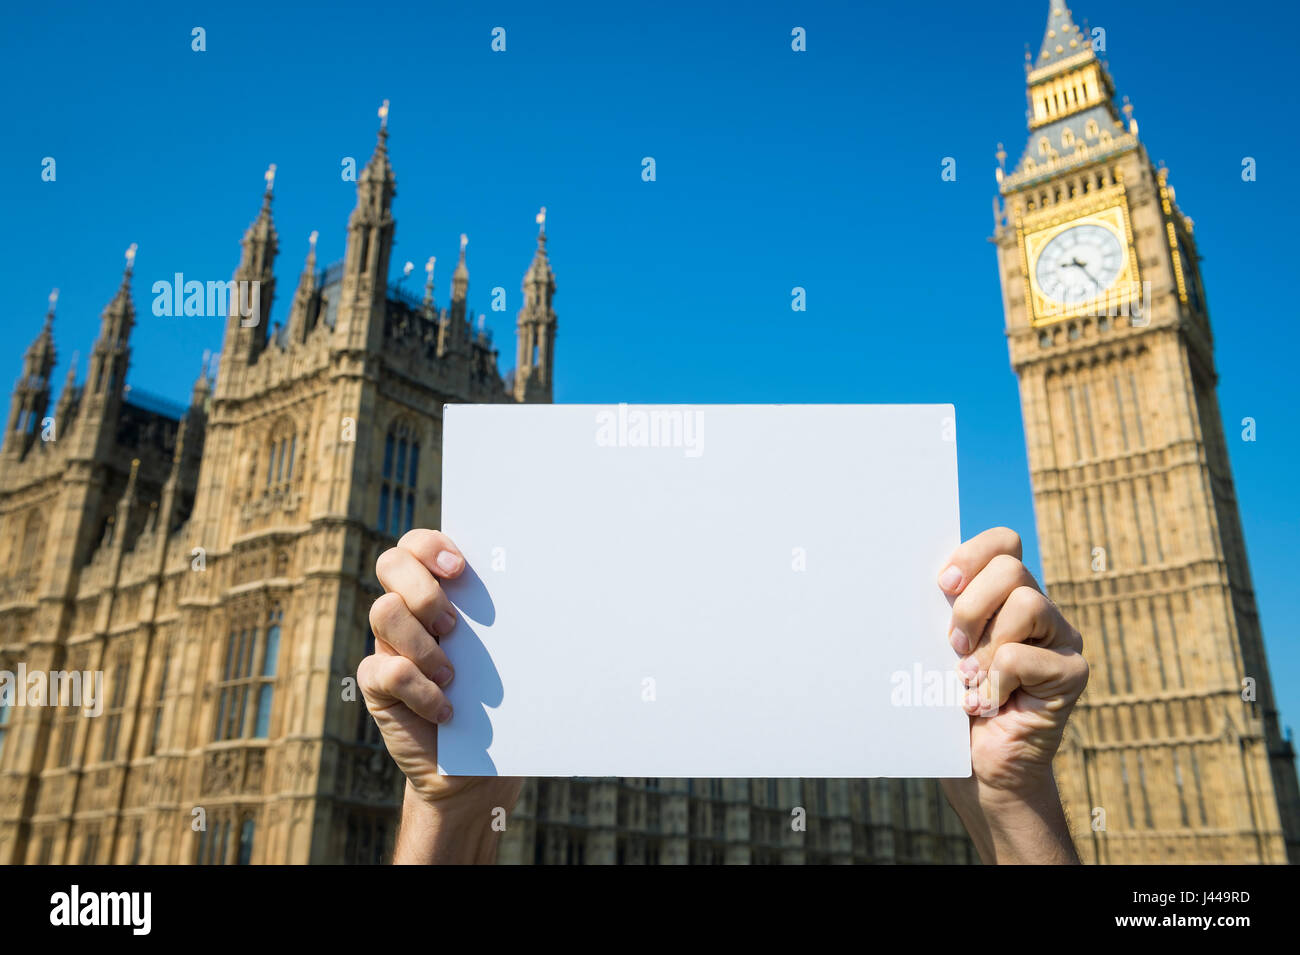 Hands holding blank sign in front of the Houses of Parliament at Westminster Palace with Big Ben in bright blue sky in London, England Stock Photo